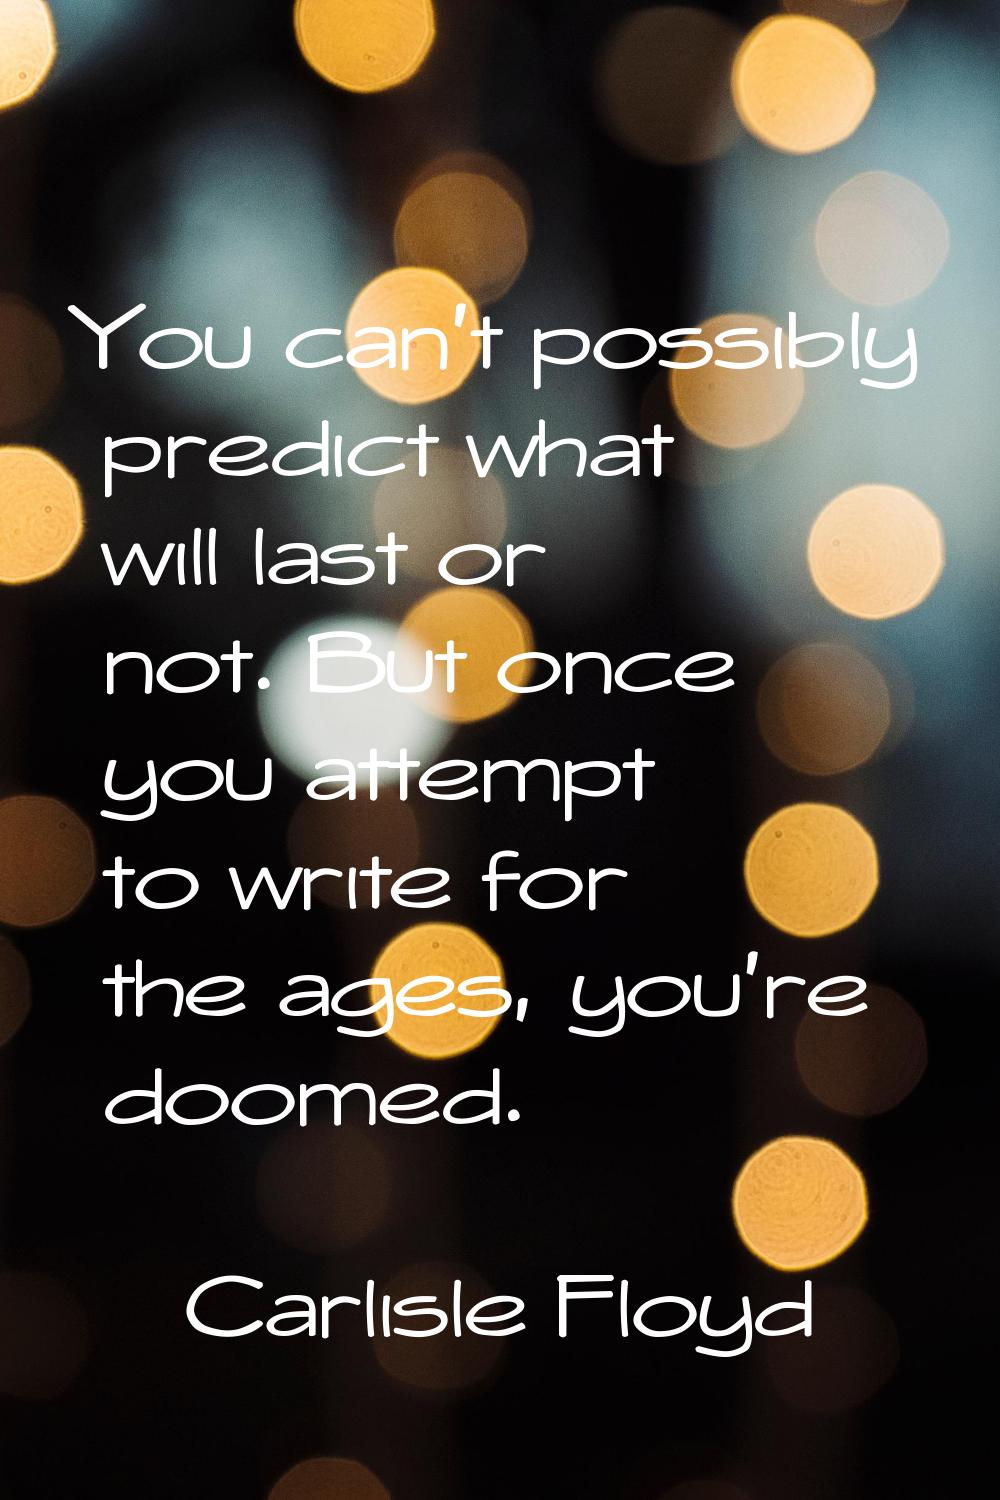 You can't possibly predict what will last or not. But once you attempt to write for the ages, you'r